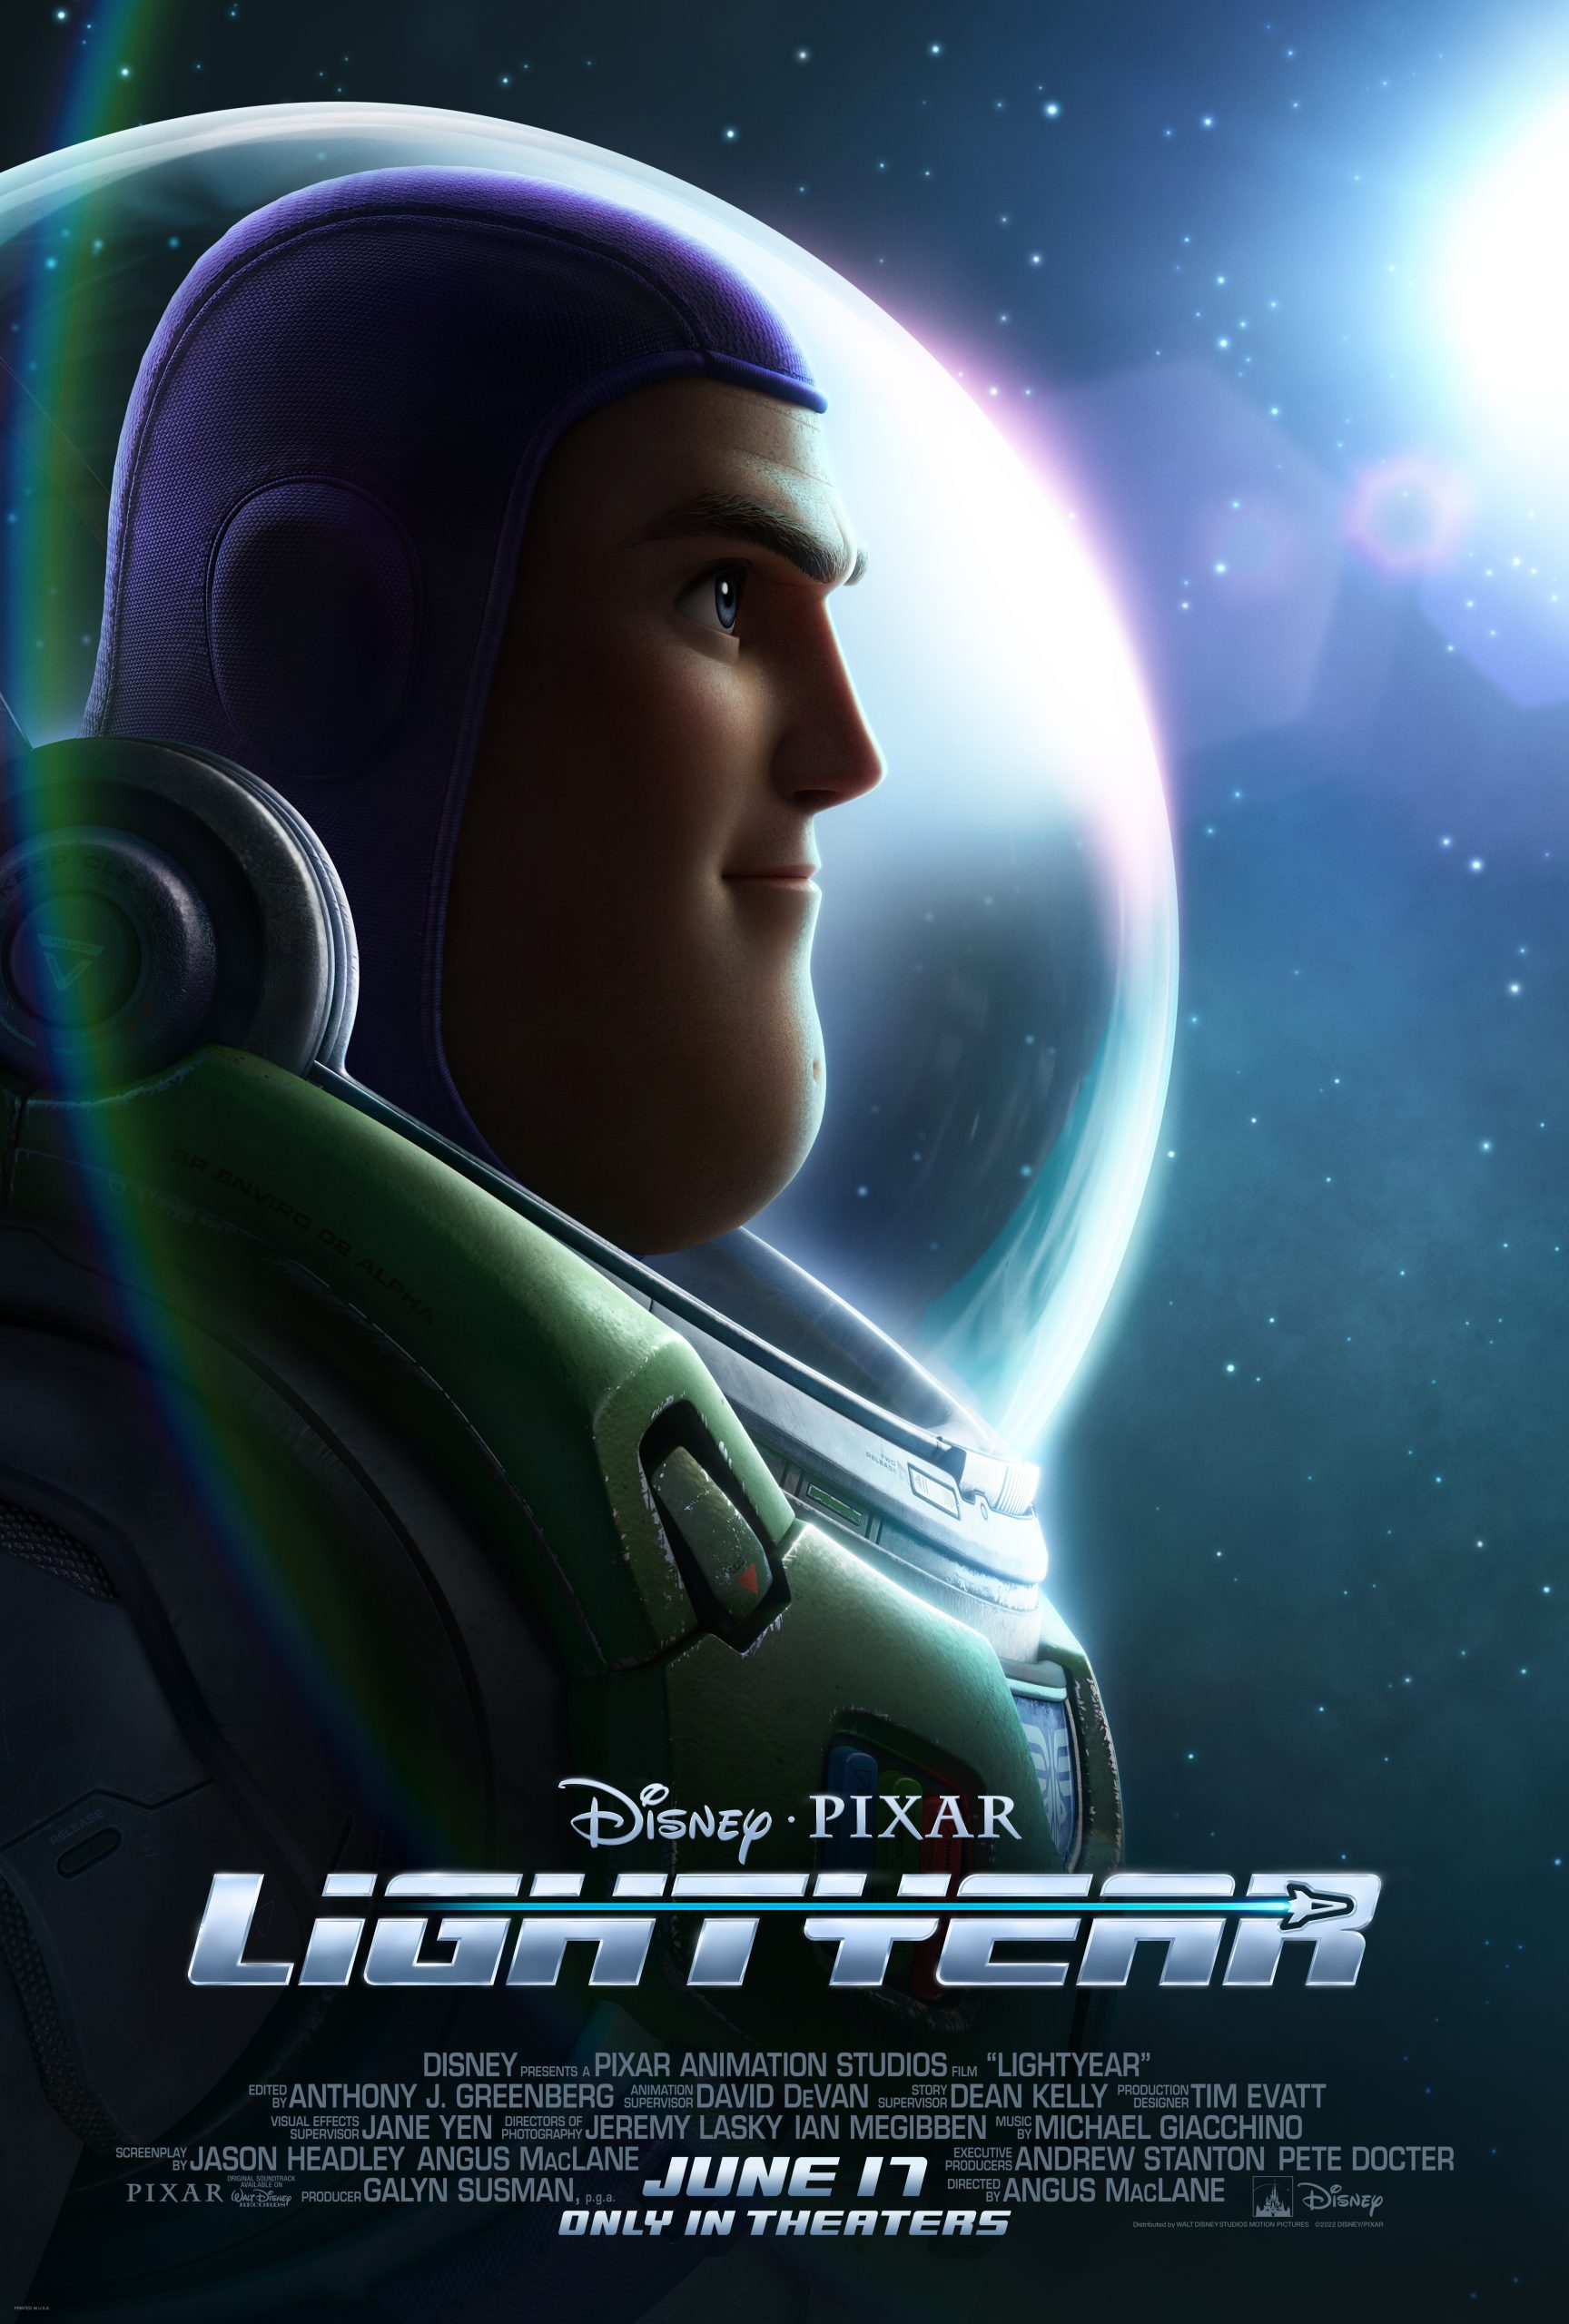 Free printable coloring and activity pages for Disney/Pixar's Lightyear movie.